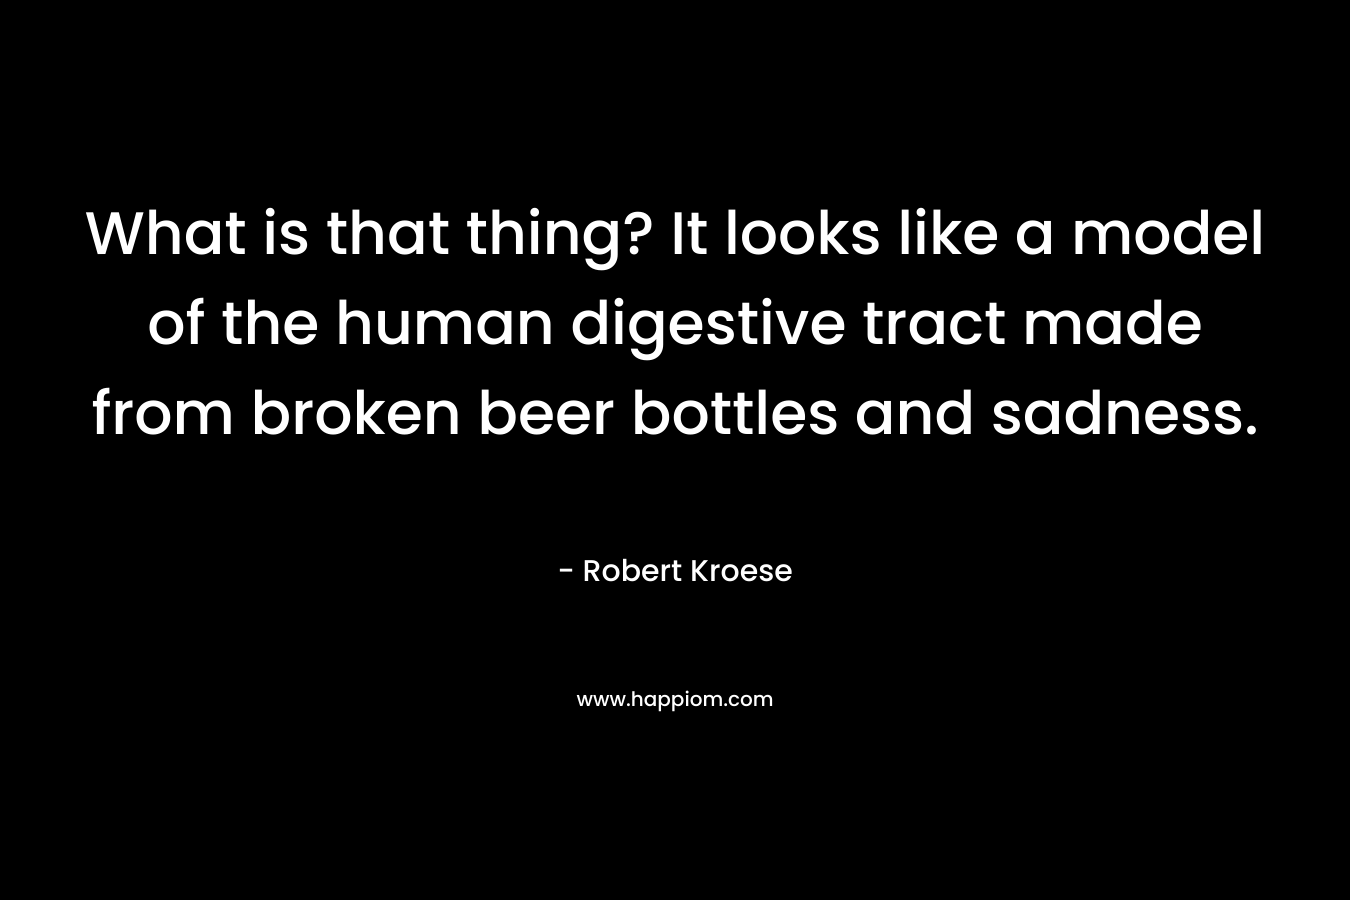 What is that thing? It looks like a model of the human digestive tract made from broken beer bottles and sadness. – Robert Kroese